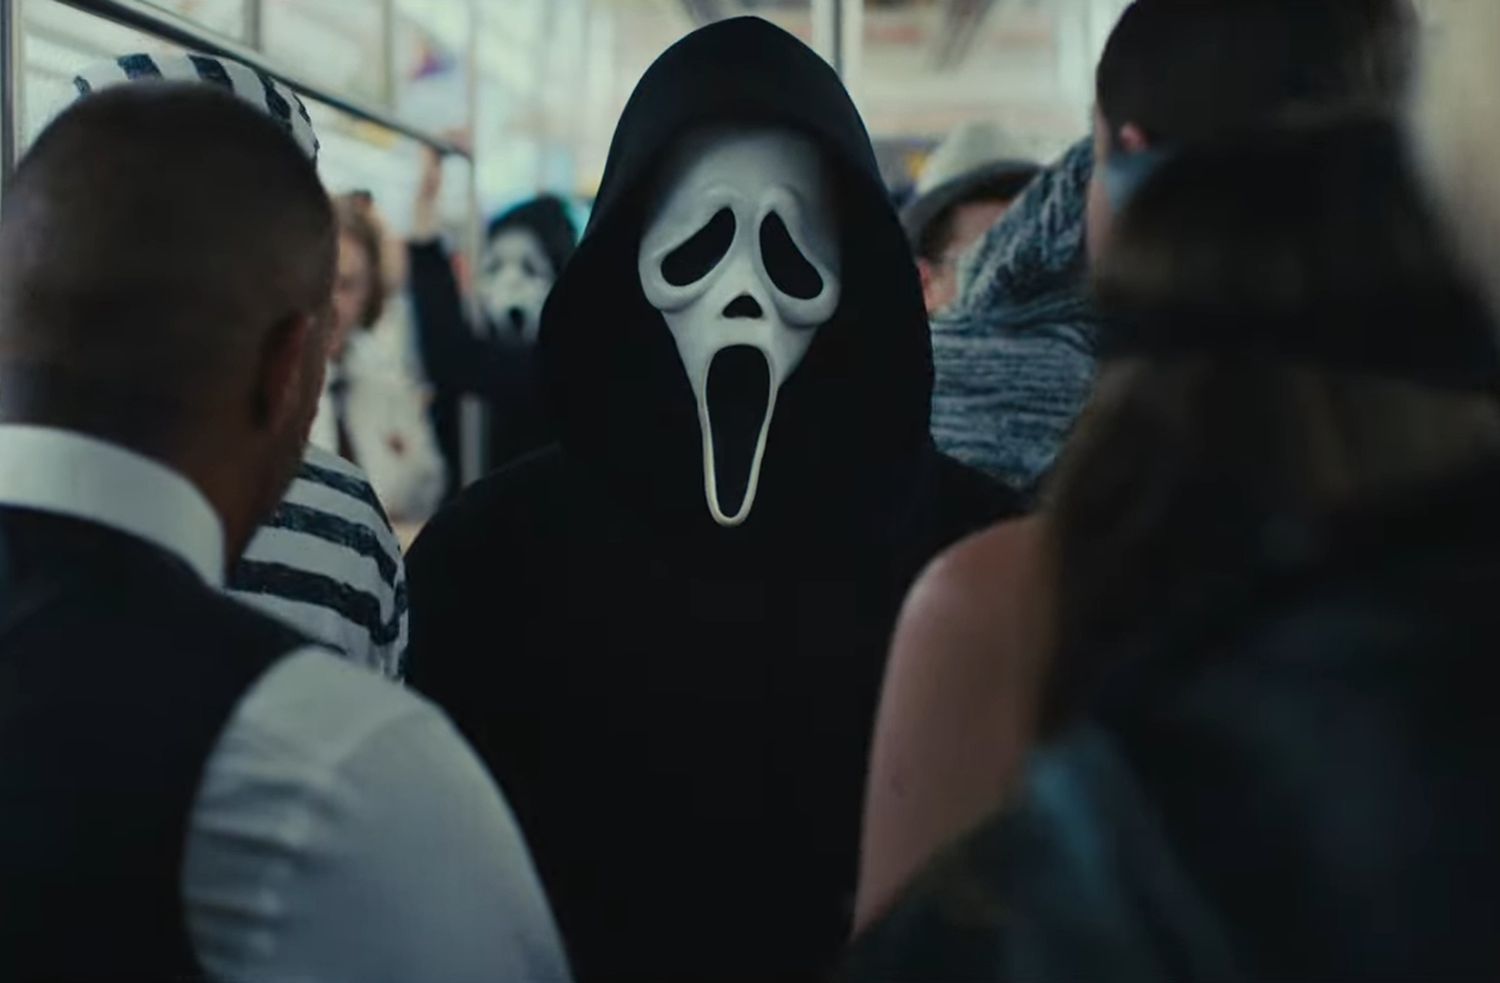 TUBE STRIKE: Old ghost face finds himself stalking victims on the New York subway in the latest episode of the horror franchise